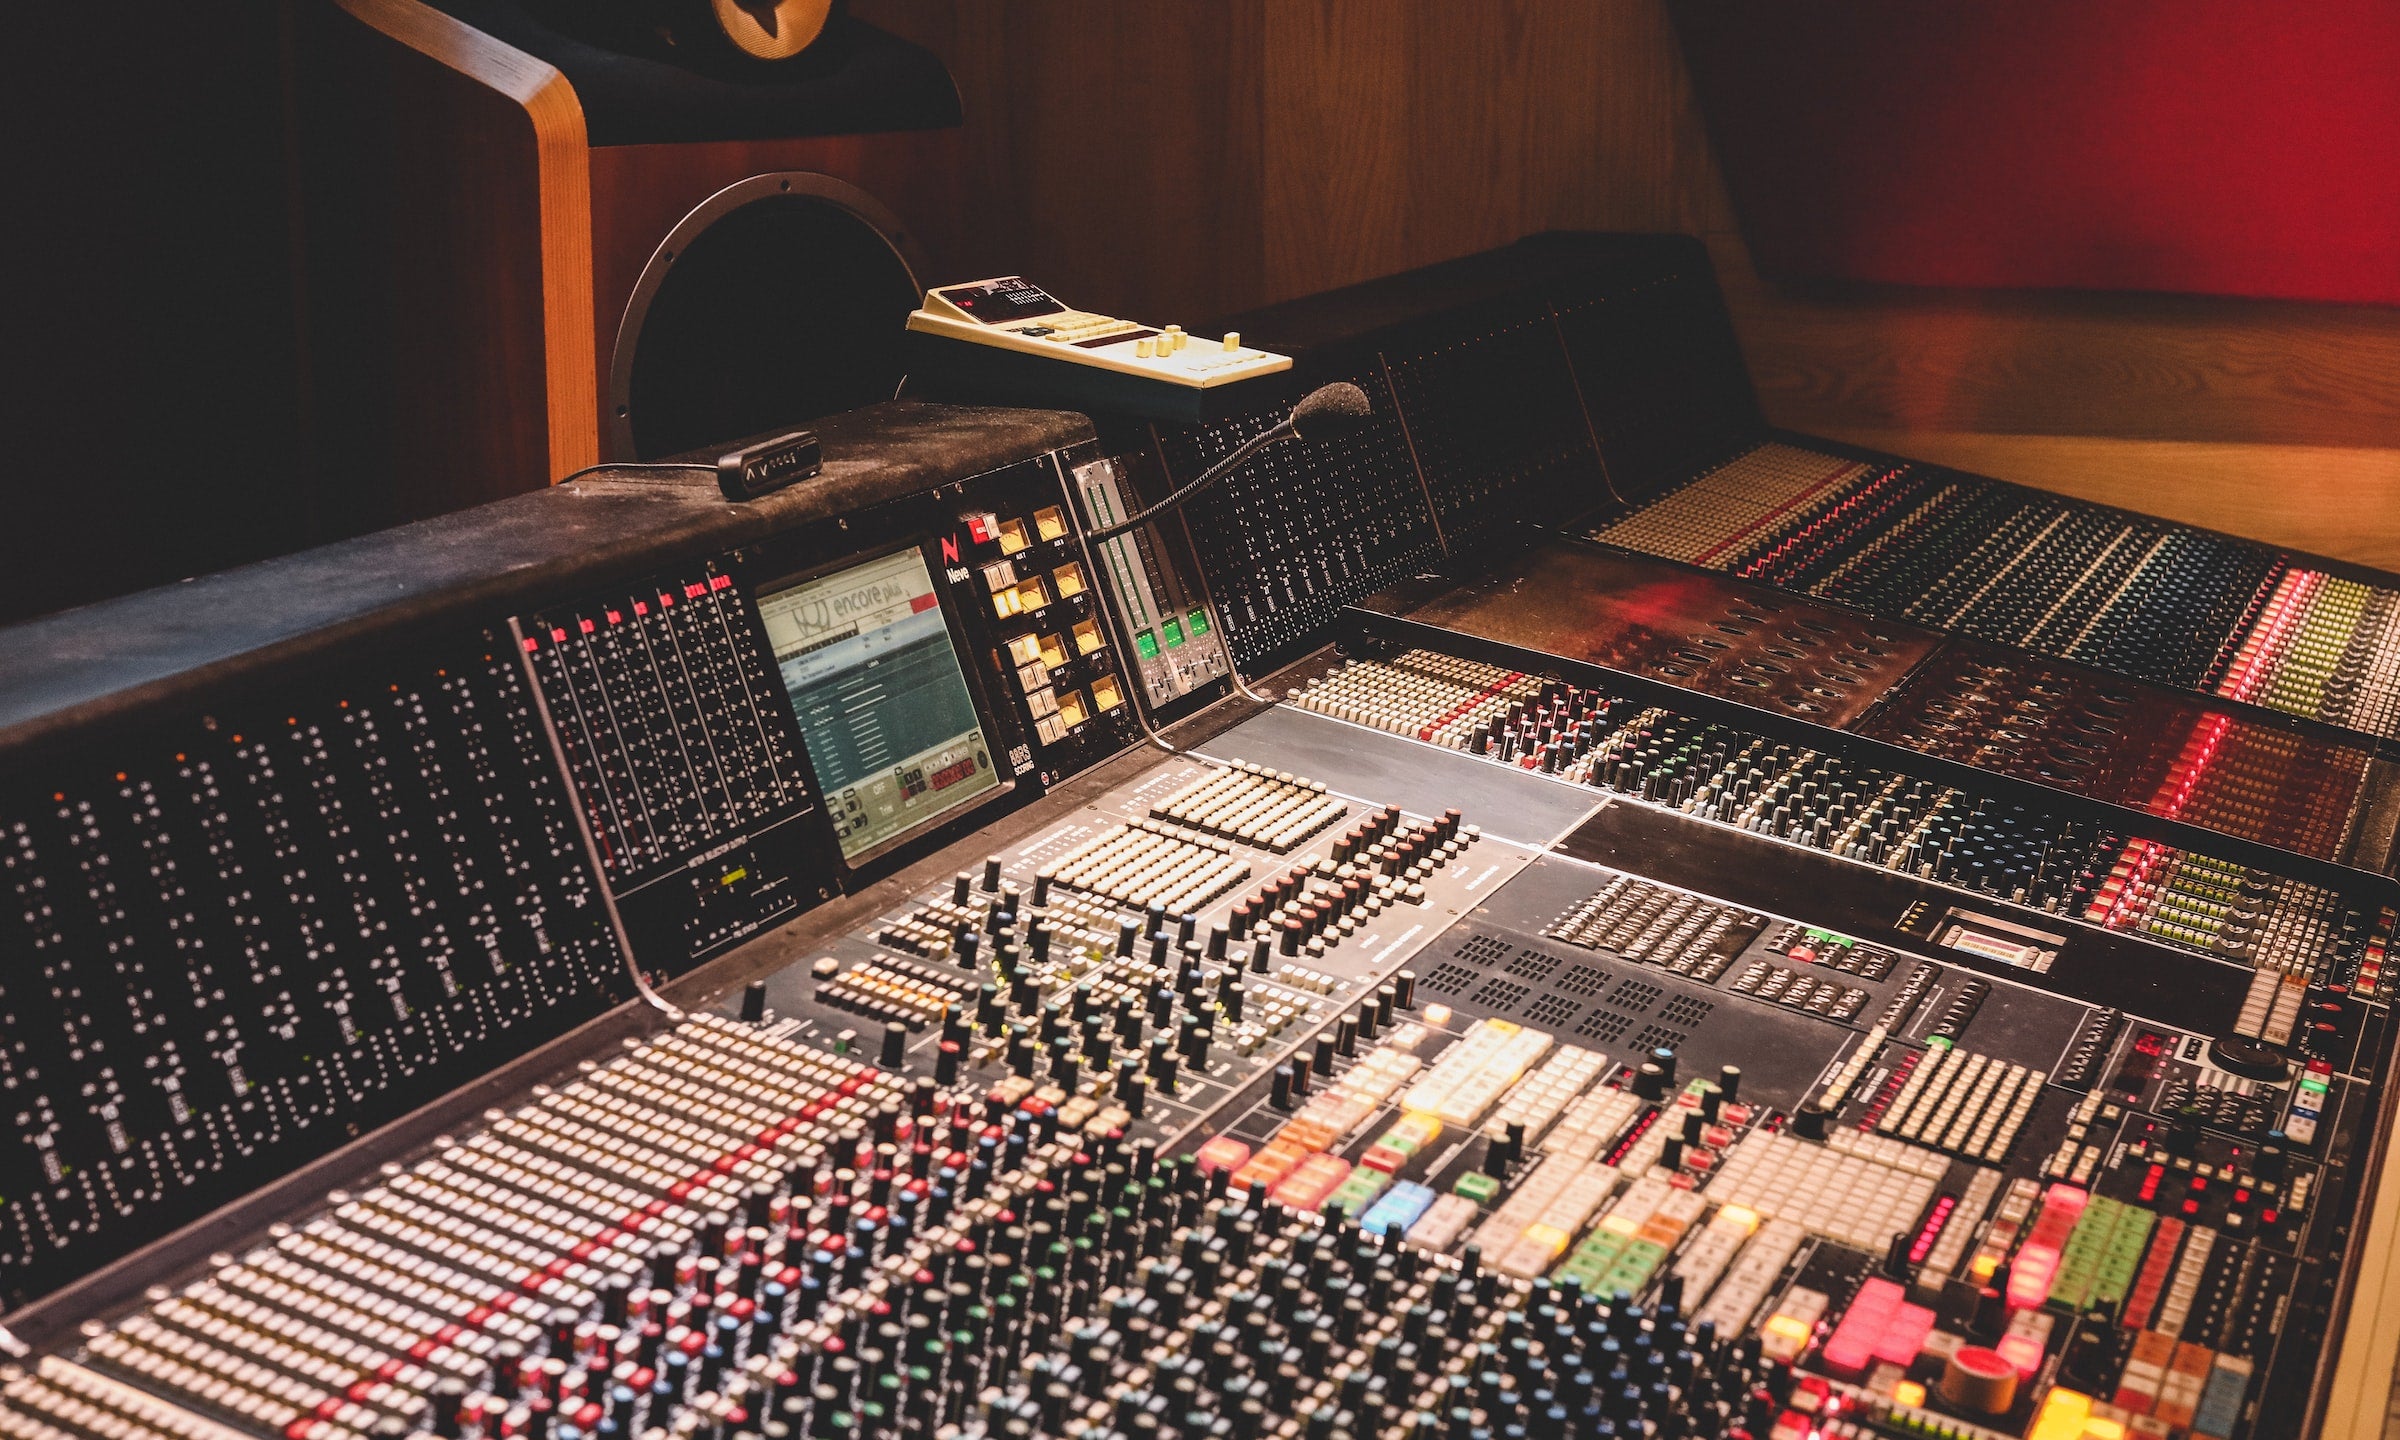 Mastering 101: Is It Hard to Learn How to Master Music?